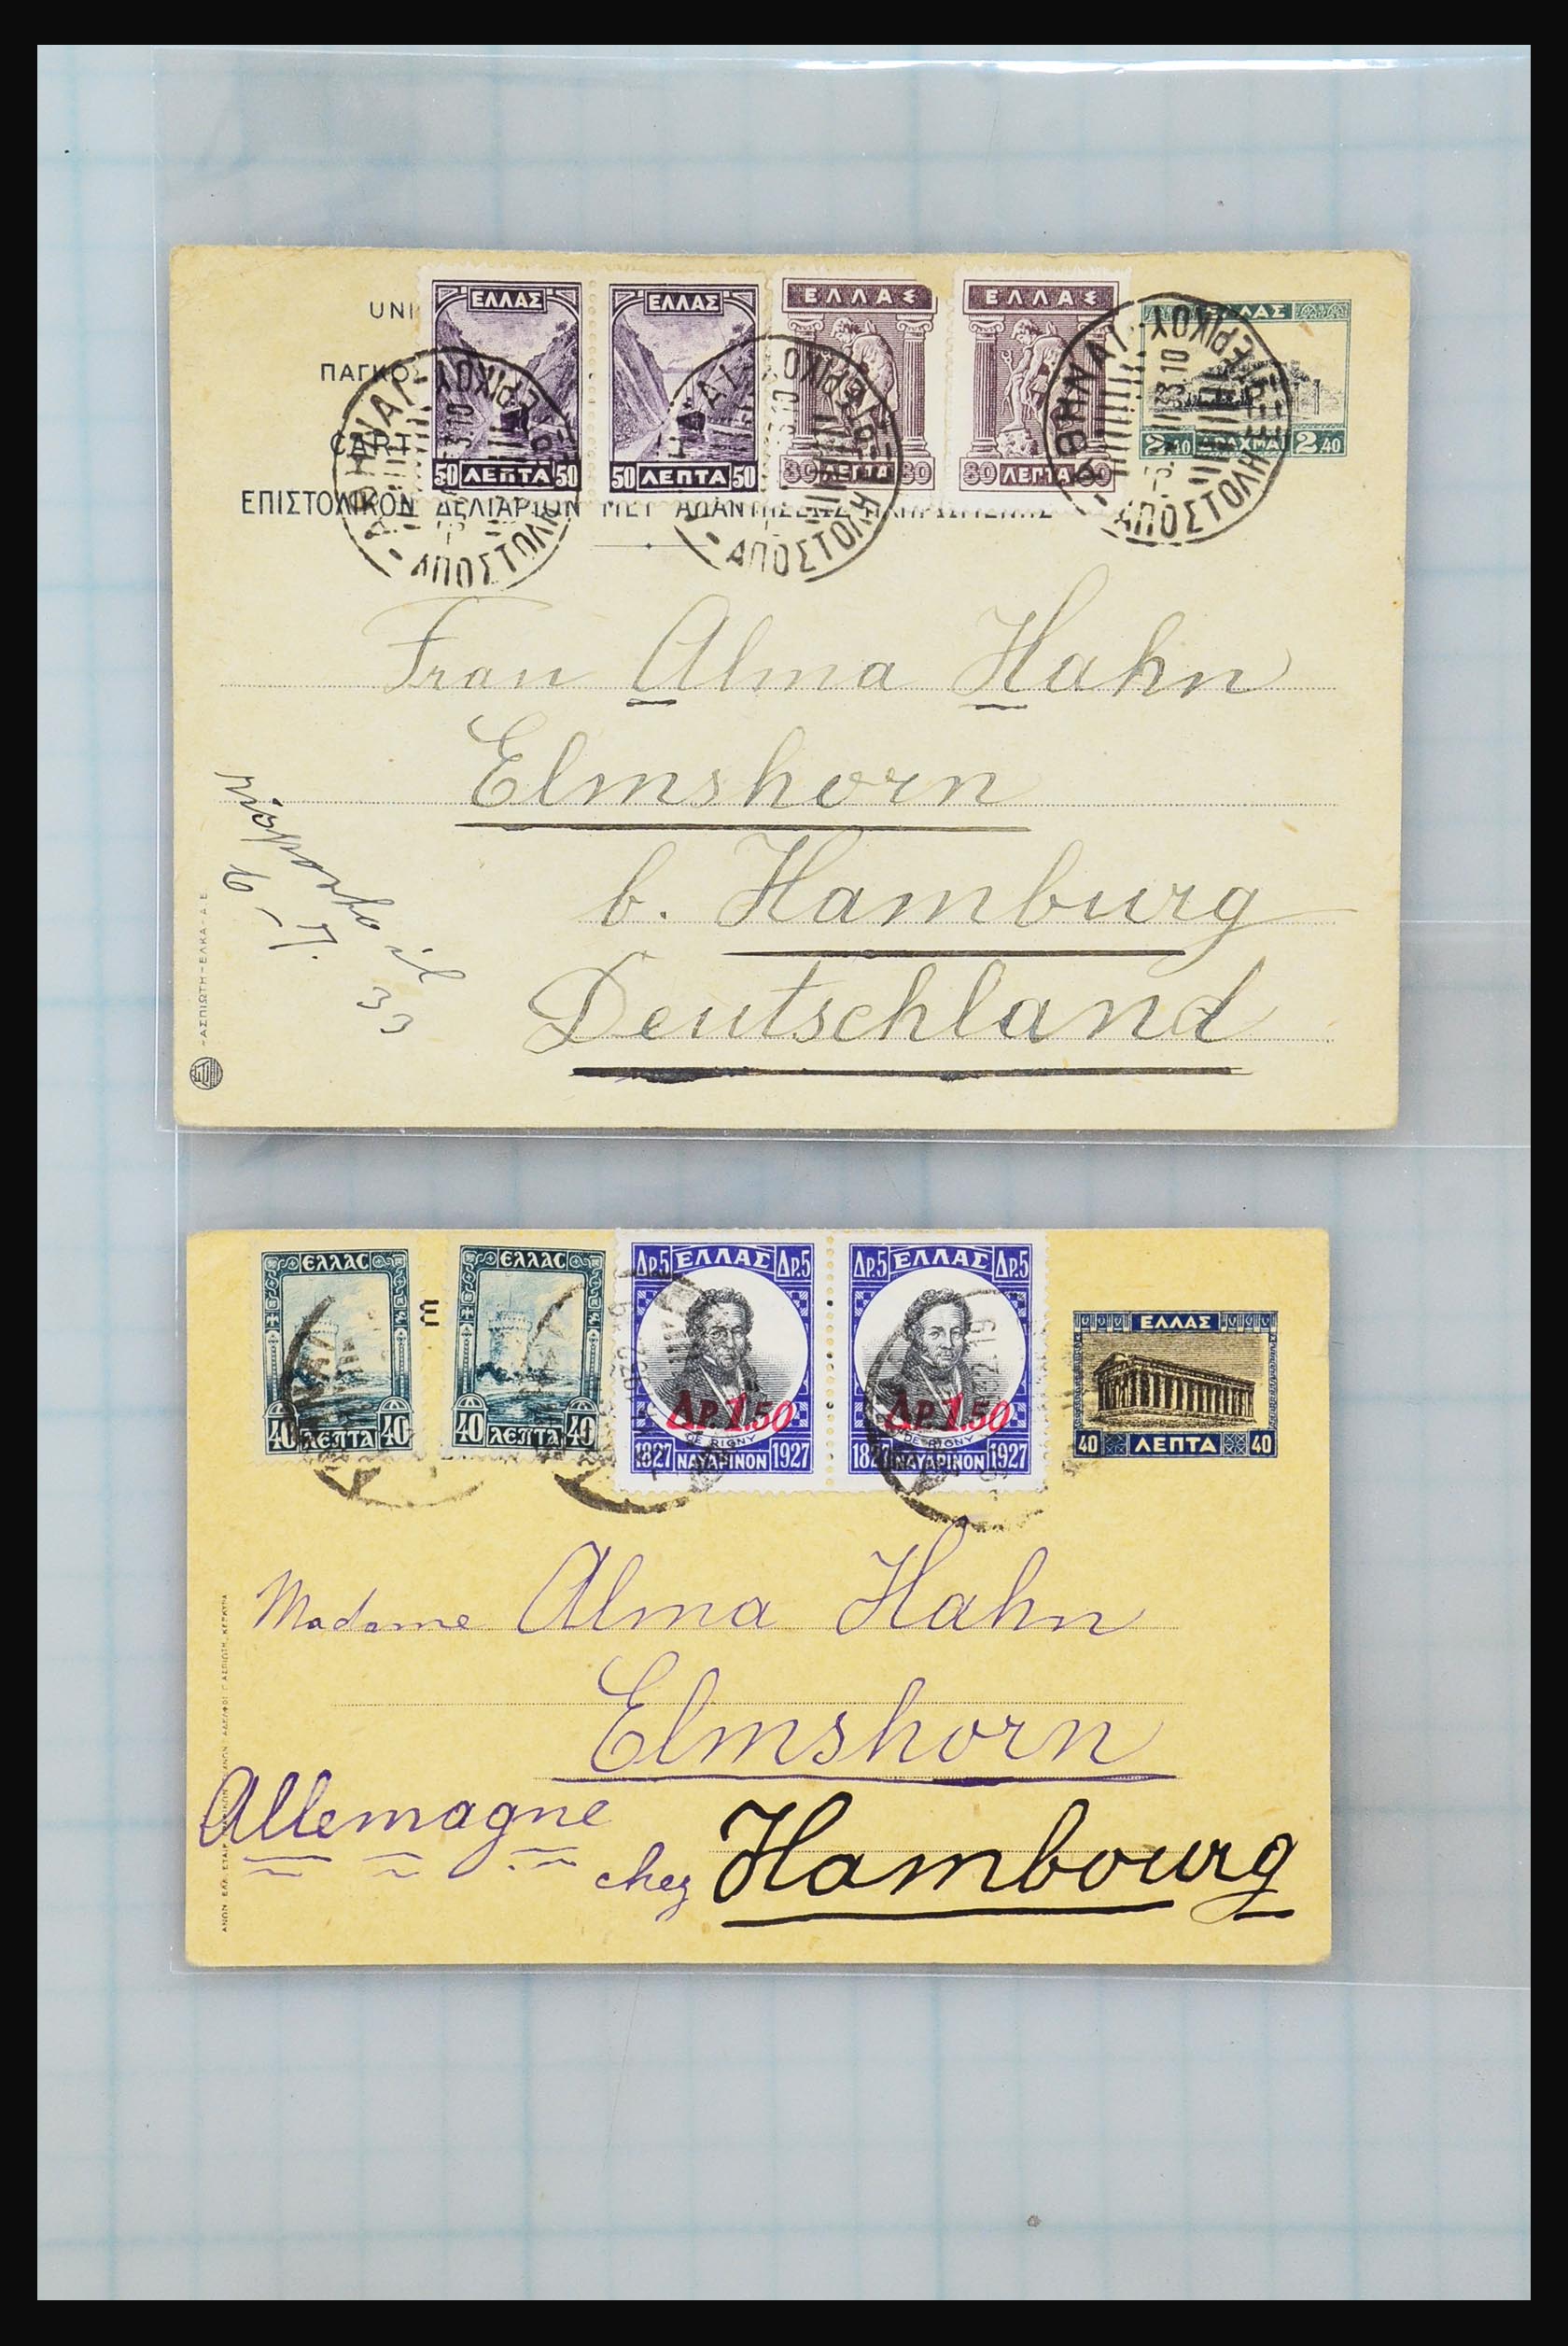 31358 031 - 31358 Portugal/Luxemburg/Greece covers 1880-1960.